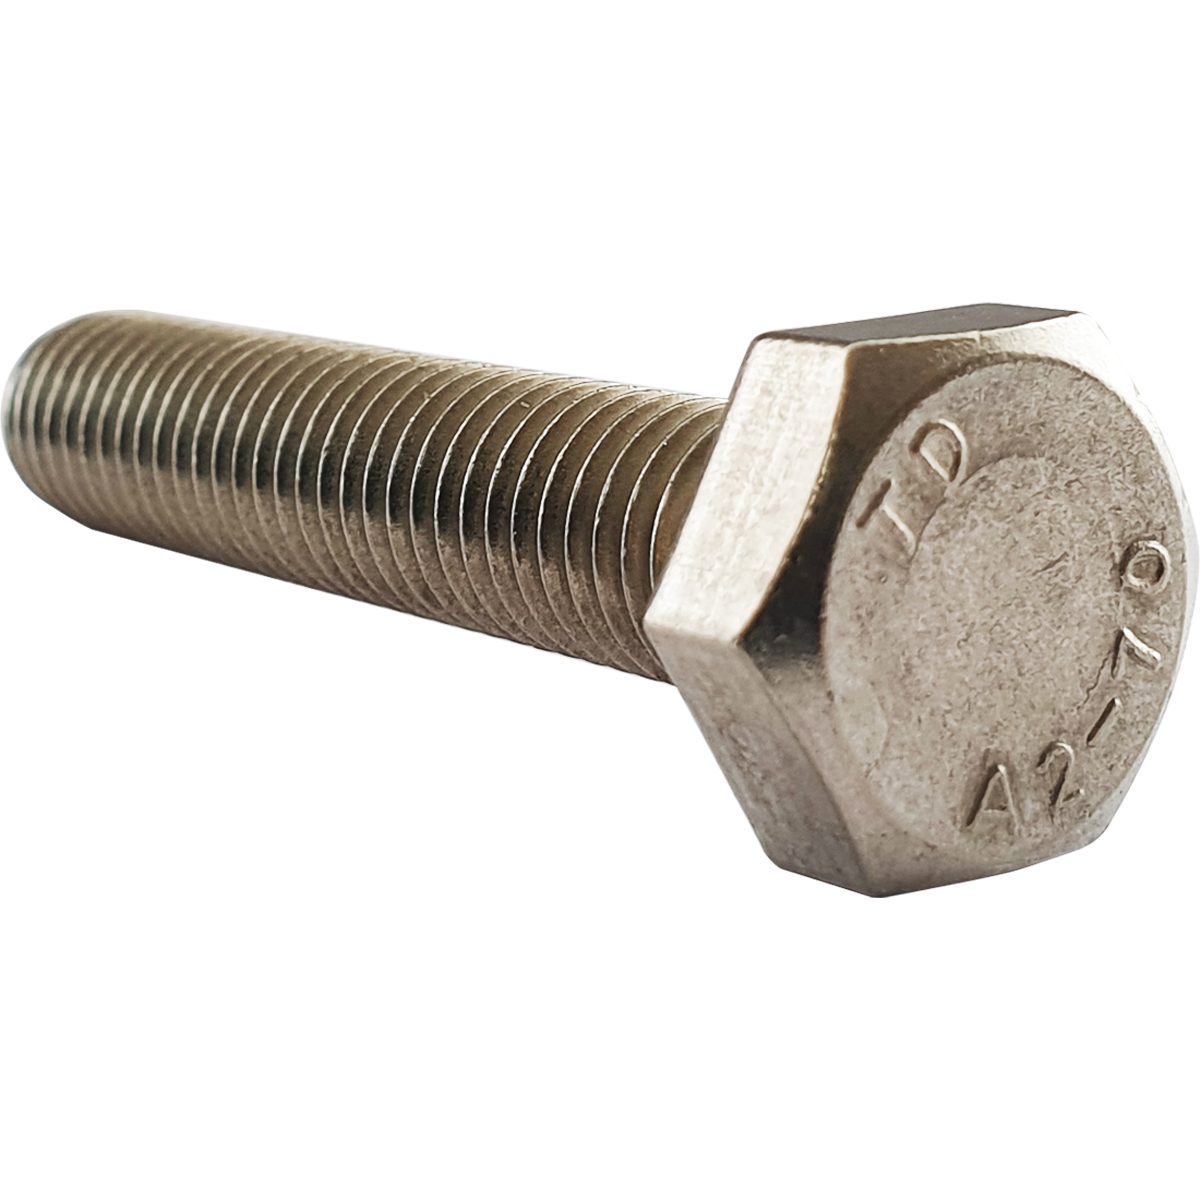 Metric A2 stainless steel fully threaded hex set screws, also known as fully threaded bolts.